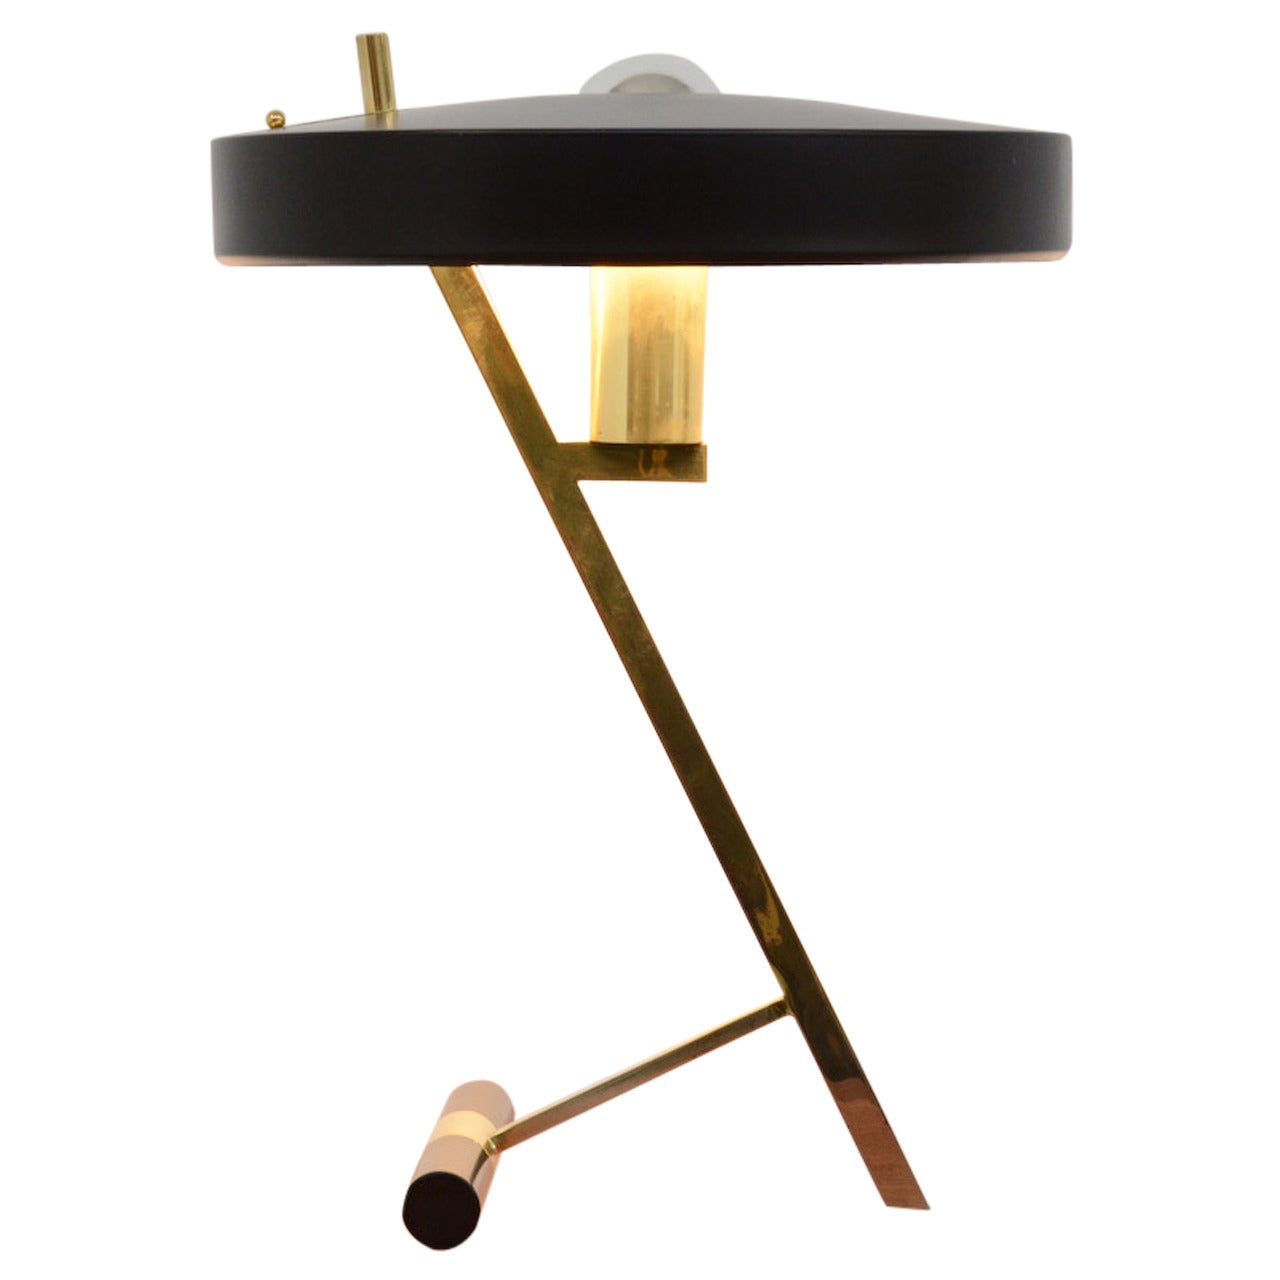 Desk Lamp by L. Kalff for Philips